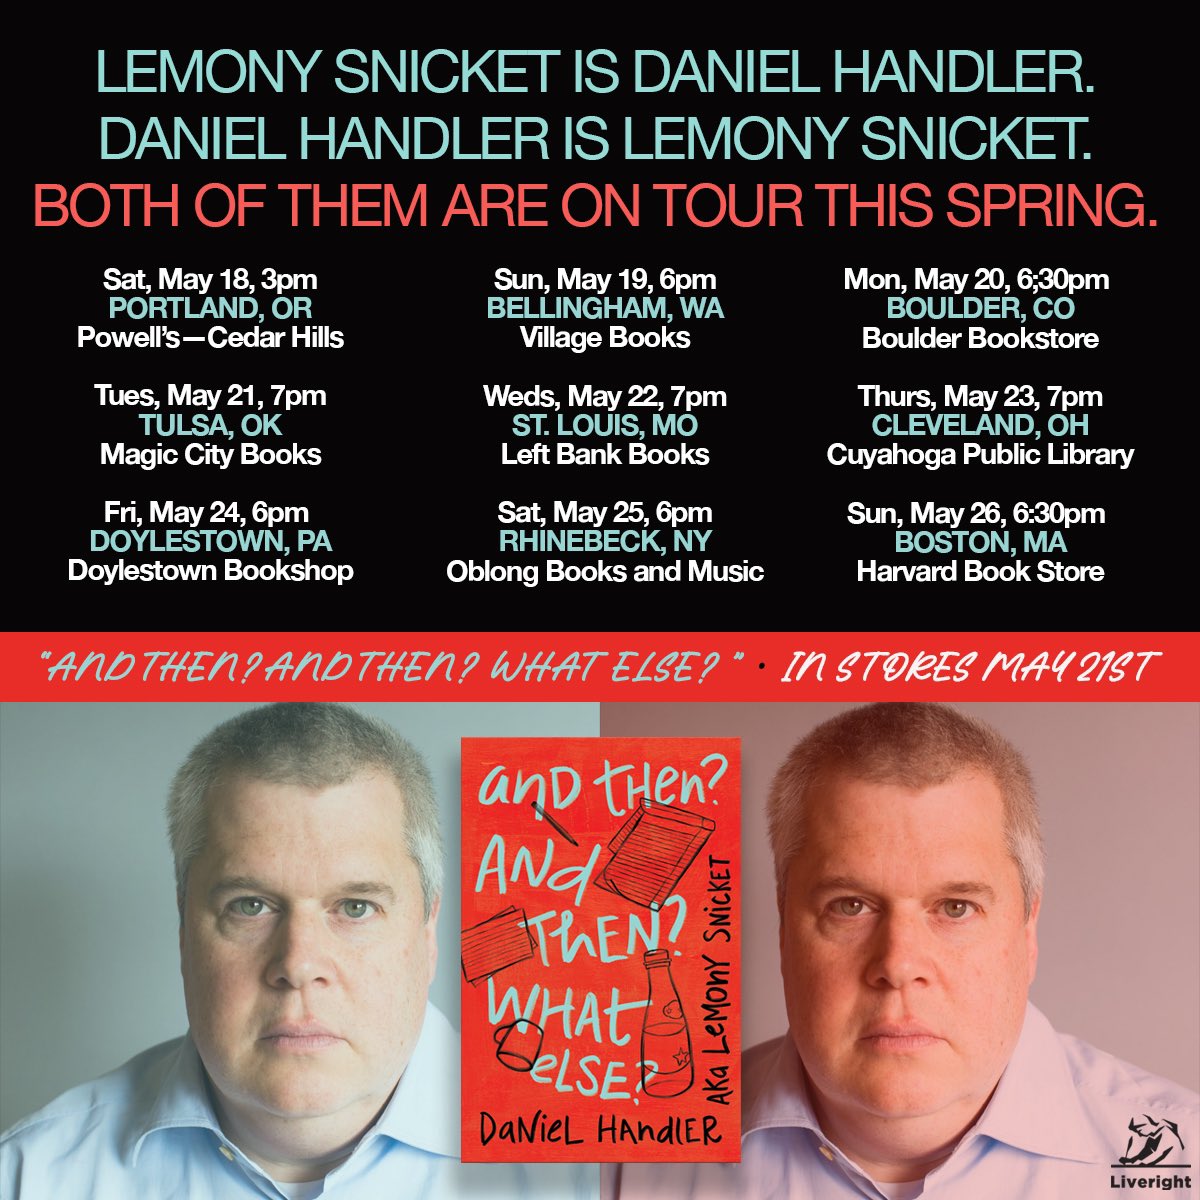 LEMONY SNICKET in Tulsa!!! One night only. First time ever. Don’t miss it. Tix at magiccitybooks.com @DanielHandler